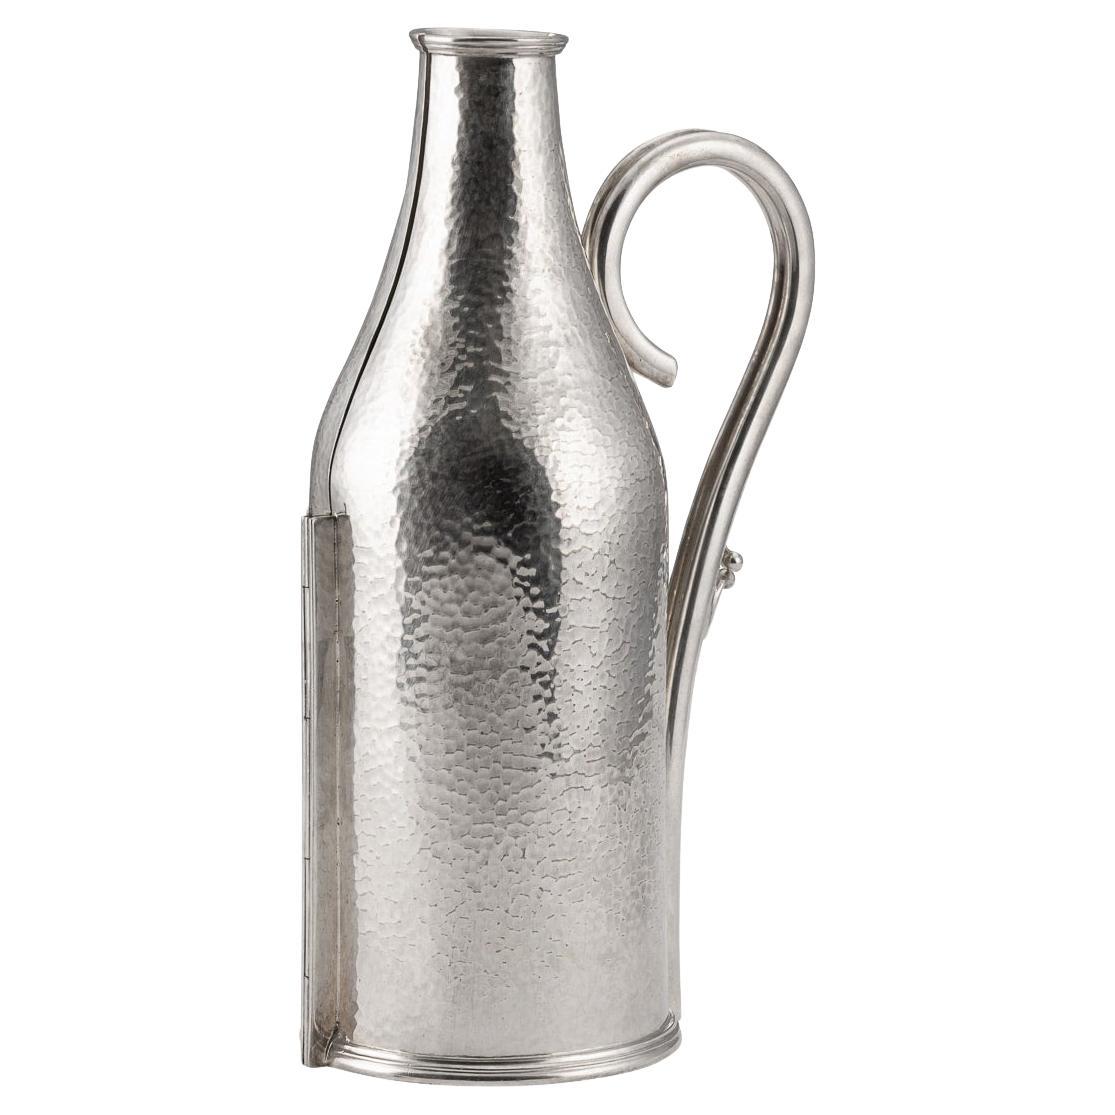 20th Century English Silver Plate Bottle Holder By Mappin & Webb, c.1930 For Sale